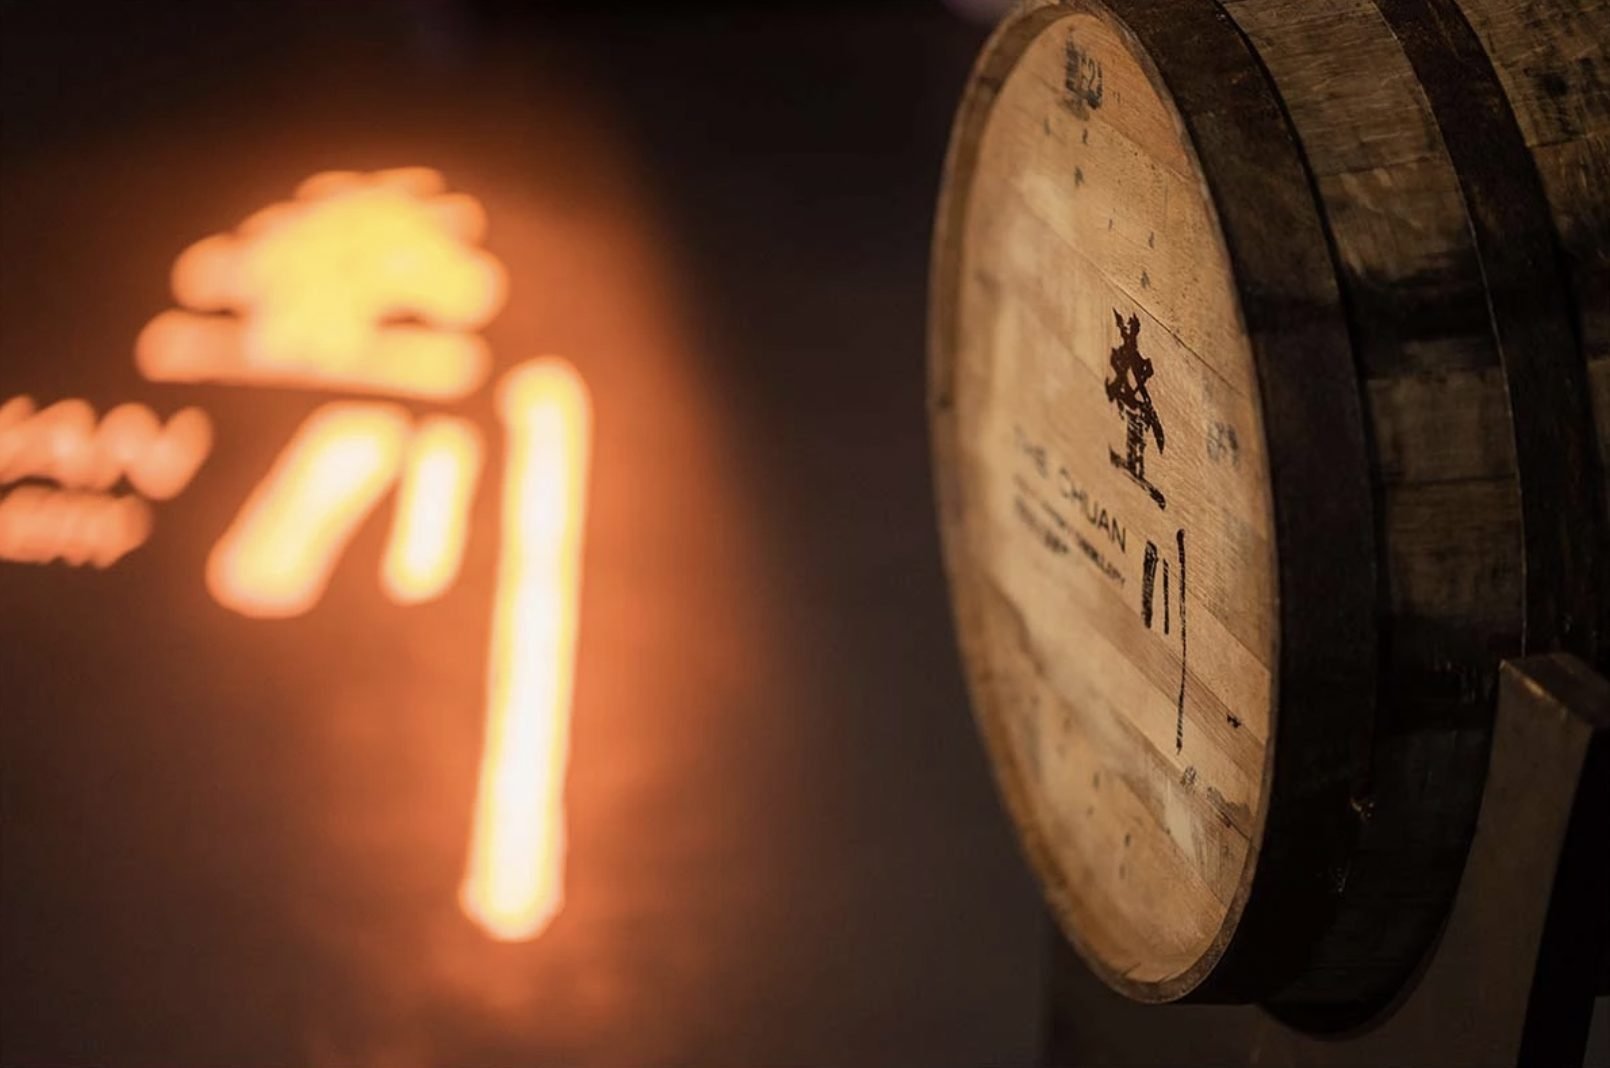 The Chuan Malt Whisky Distillery in China whisky cask